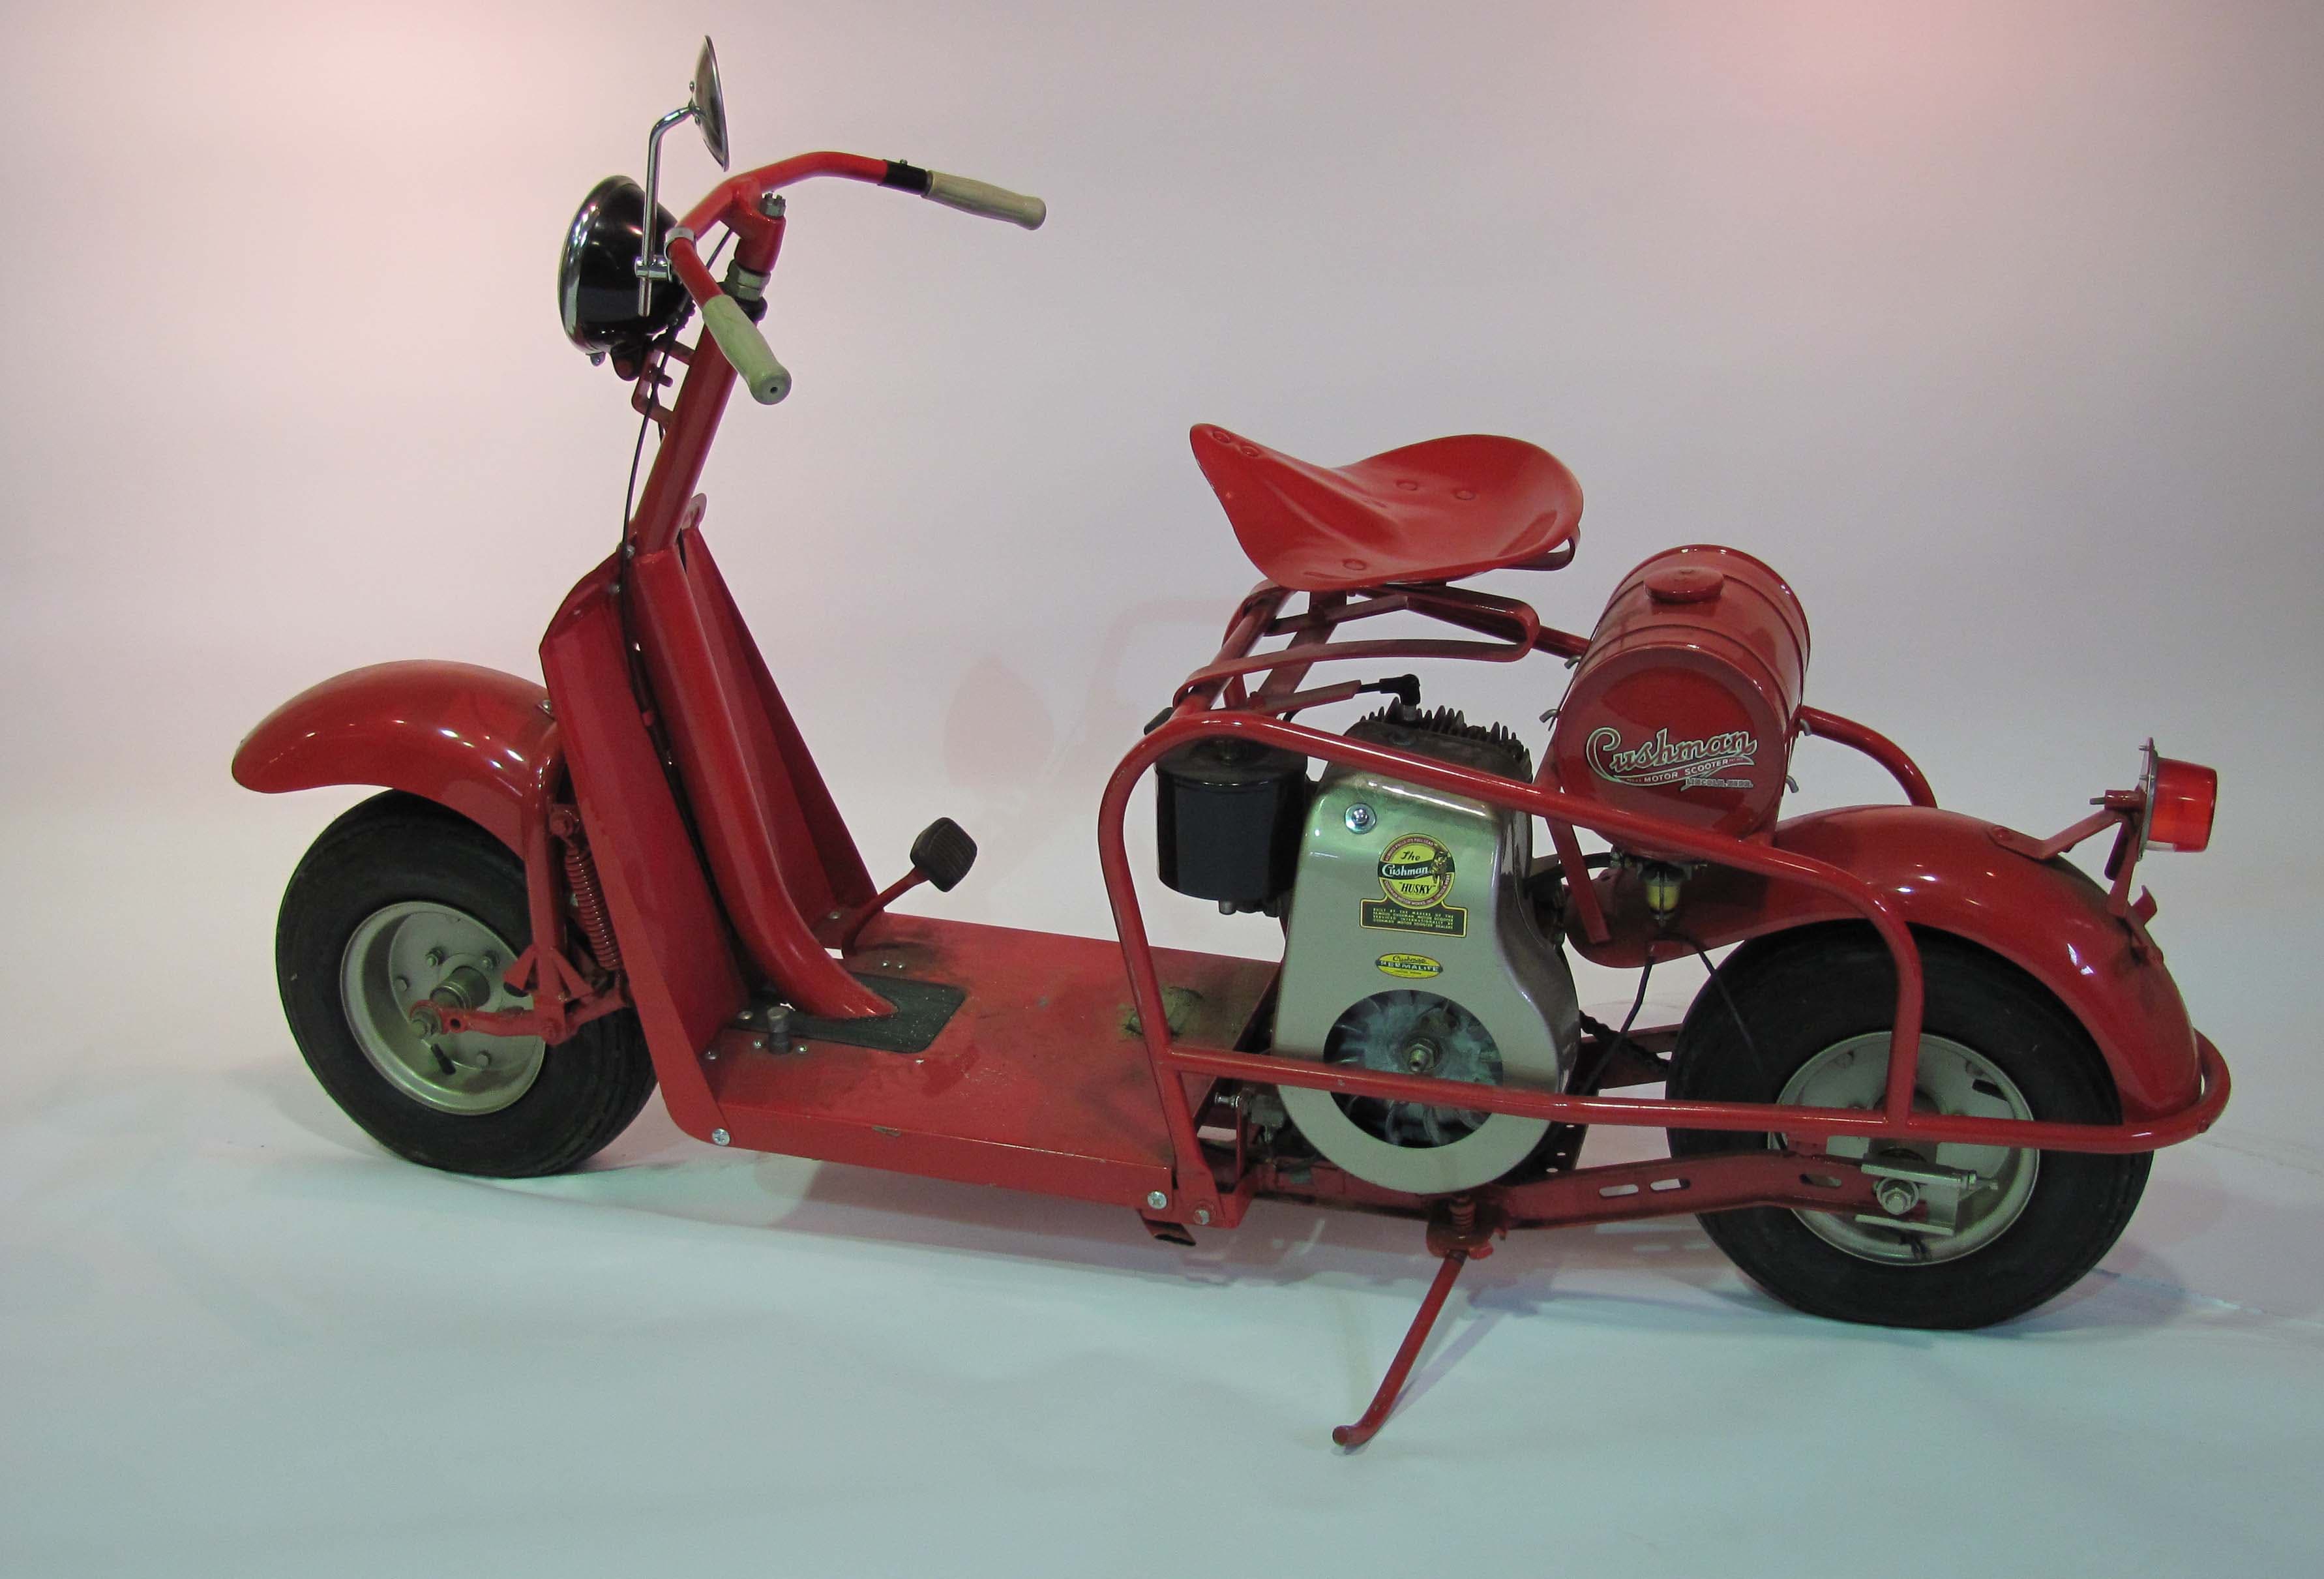 811.94300 Allstate  Scooter